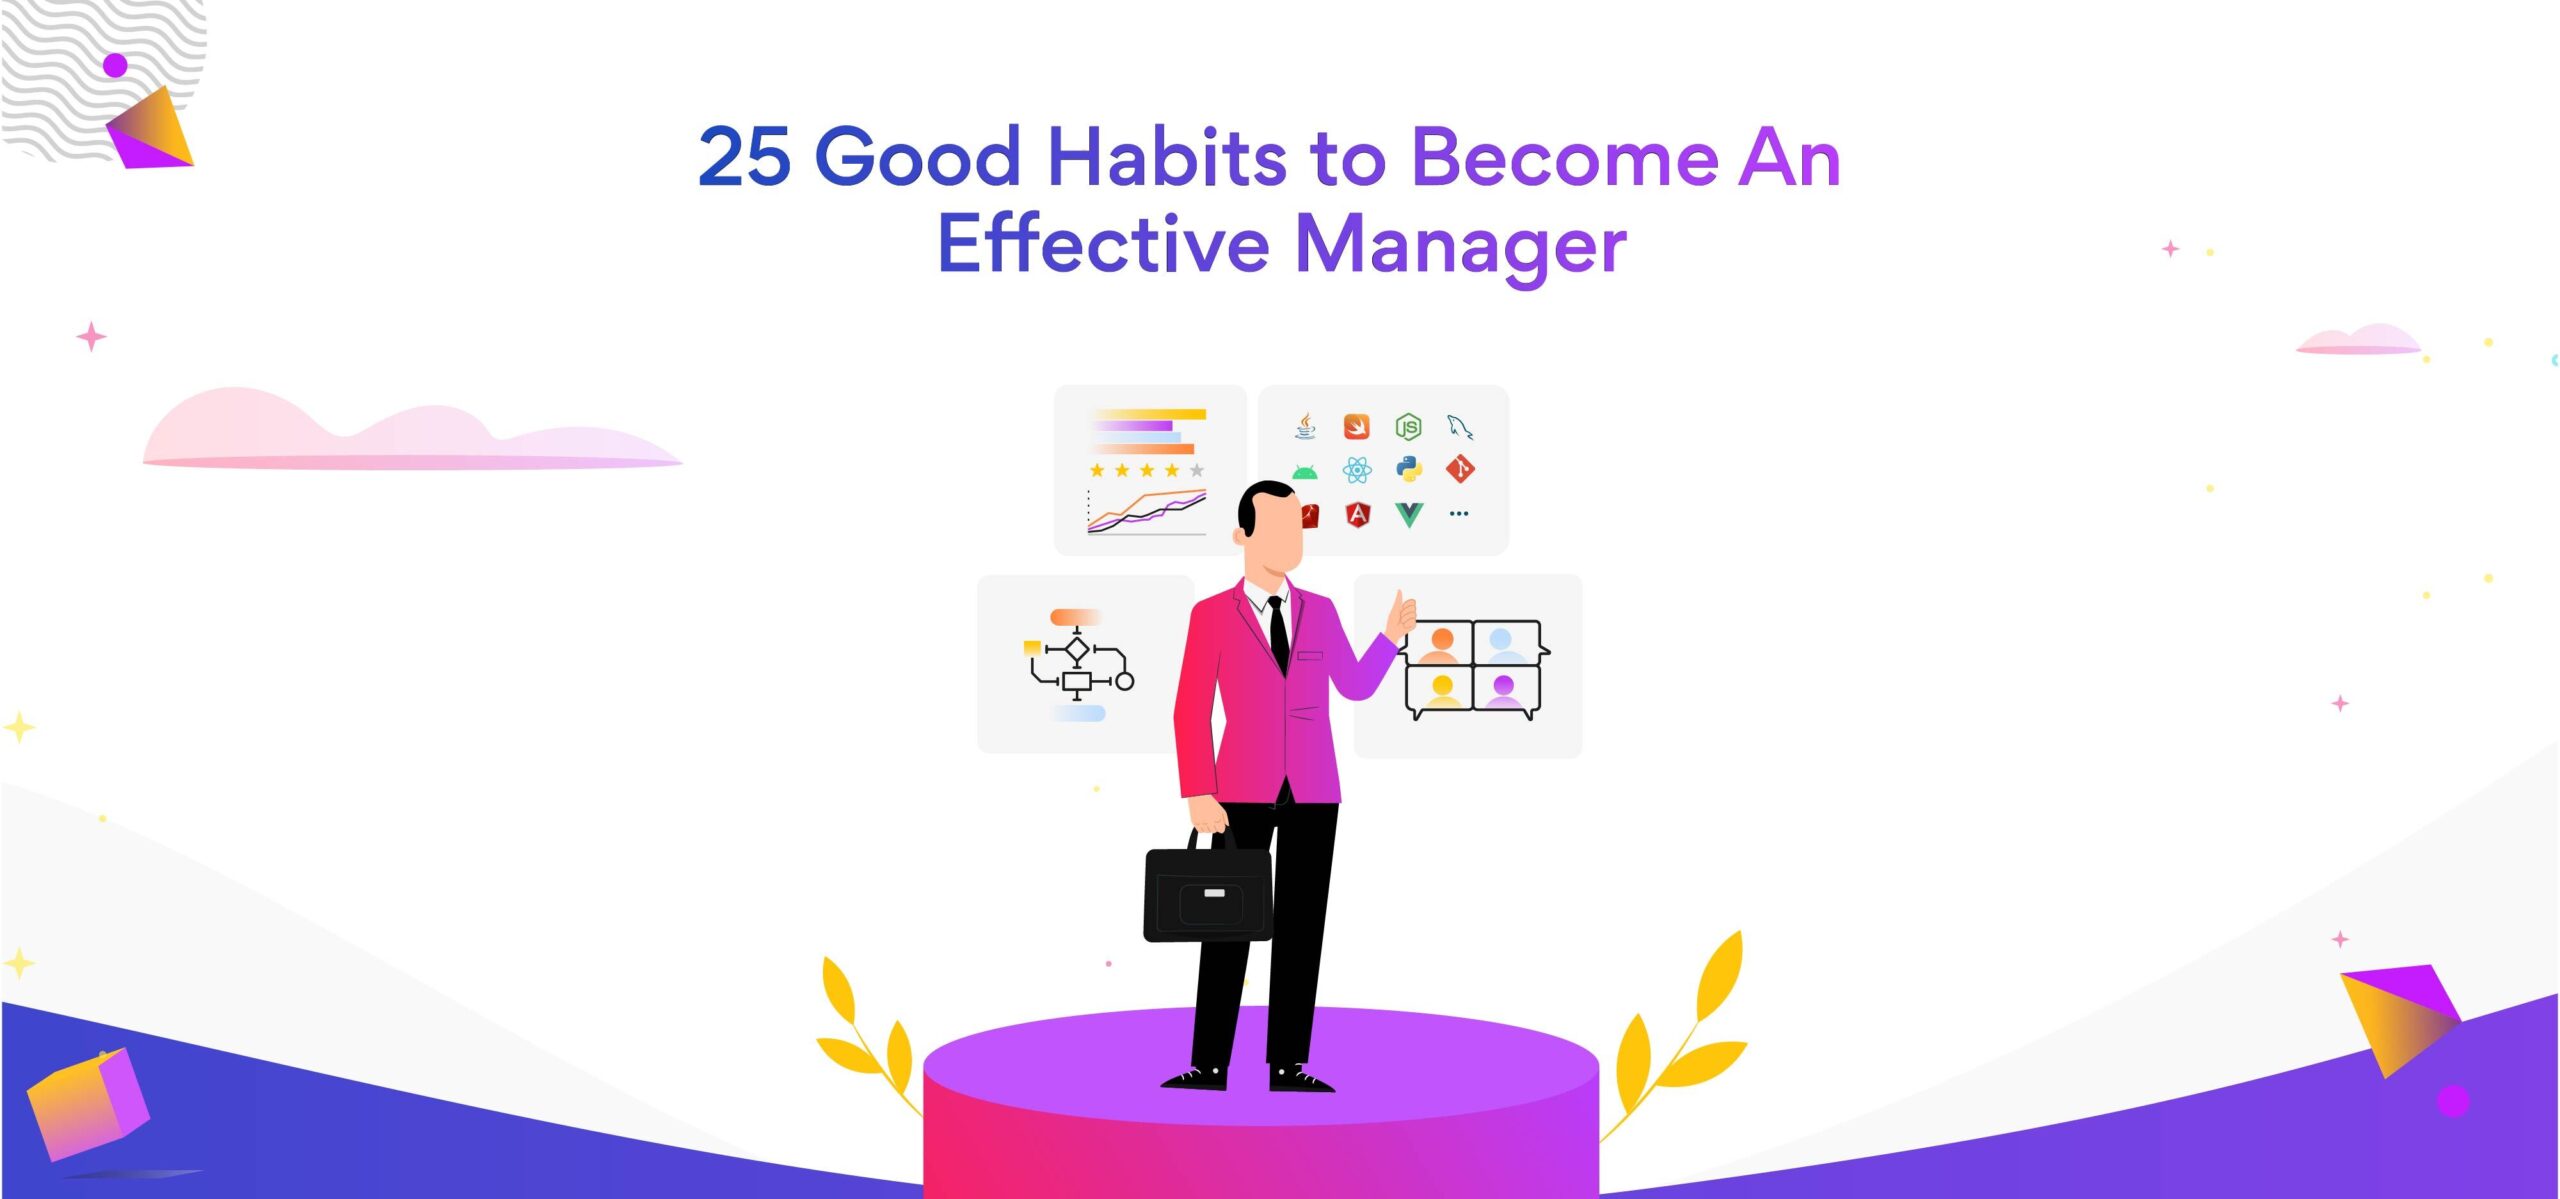 Effective manager habits